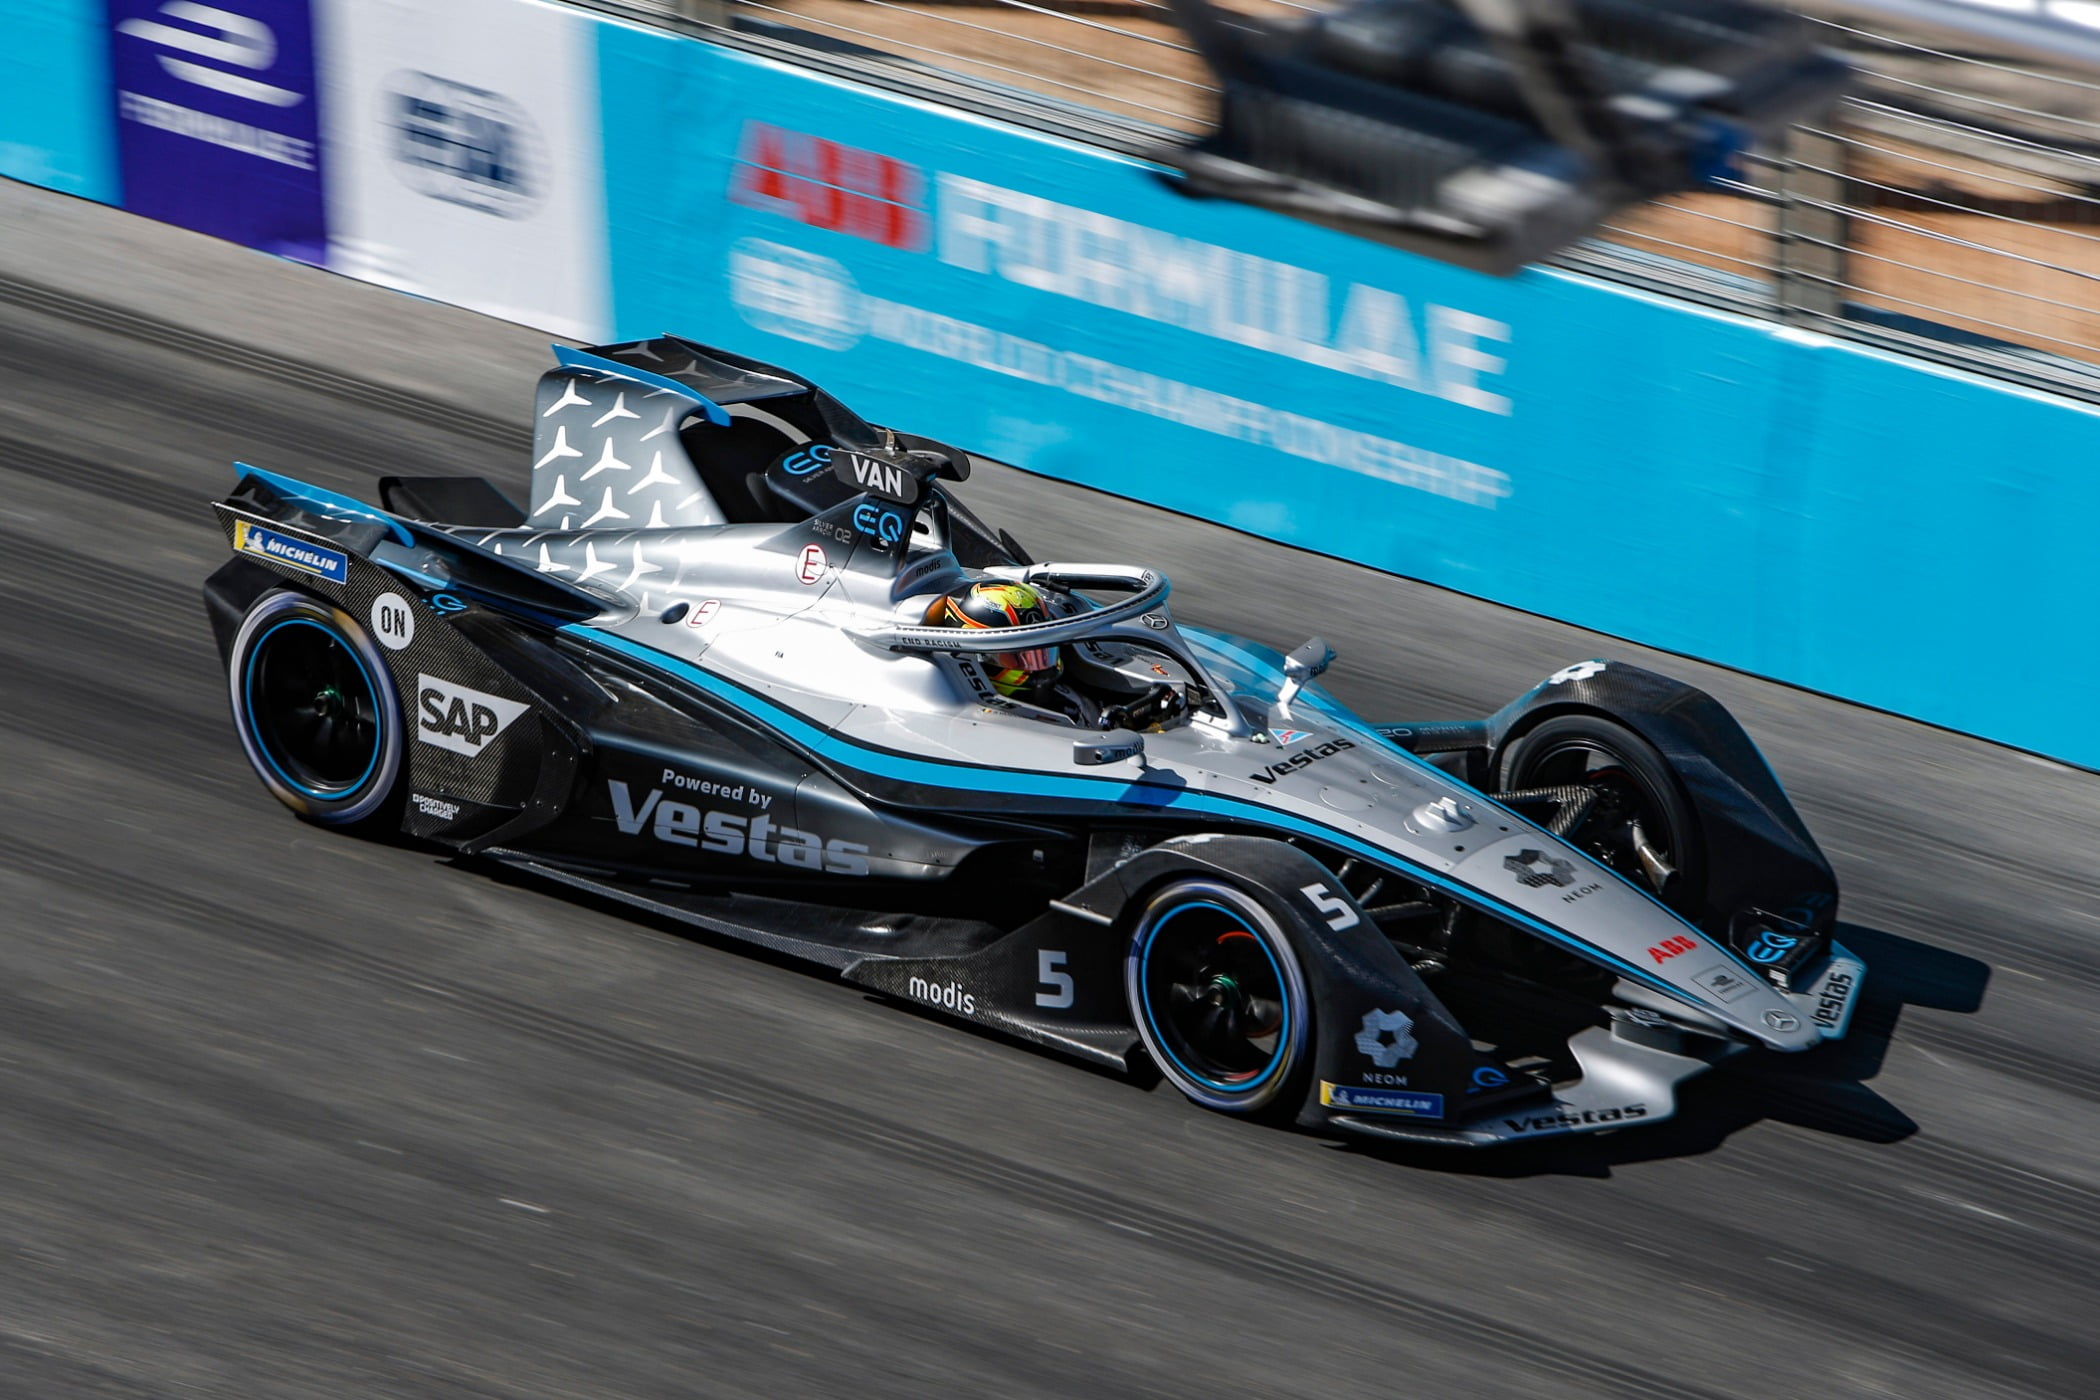 Formula E races are held on urban street circuits around the world. 